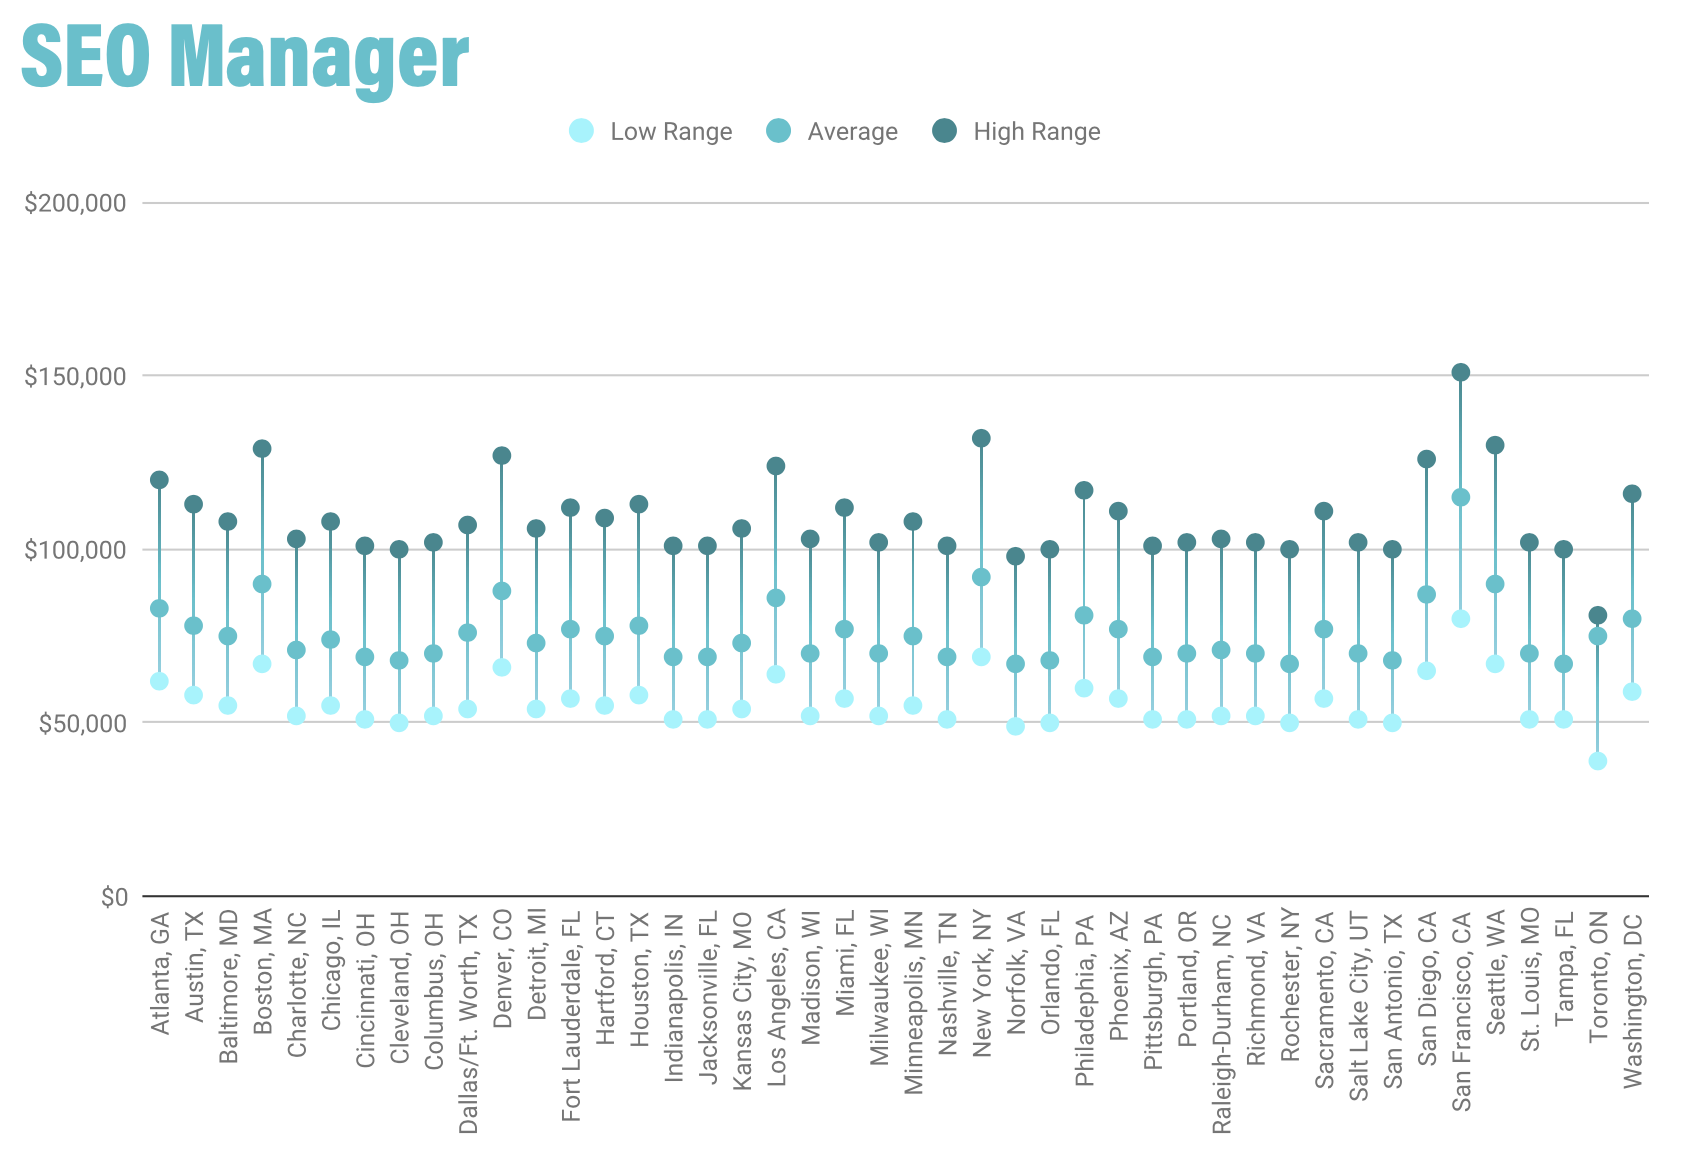 /uploads/2020/01/SEO_Manager_Salaries.png